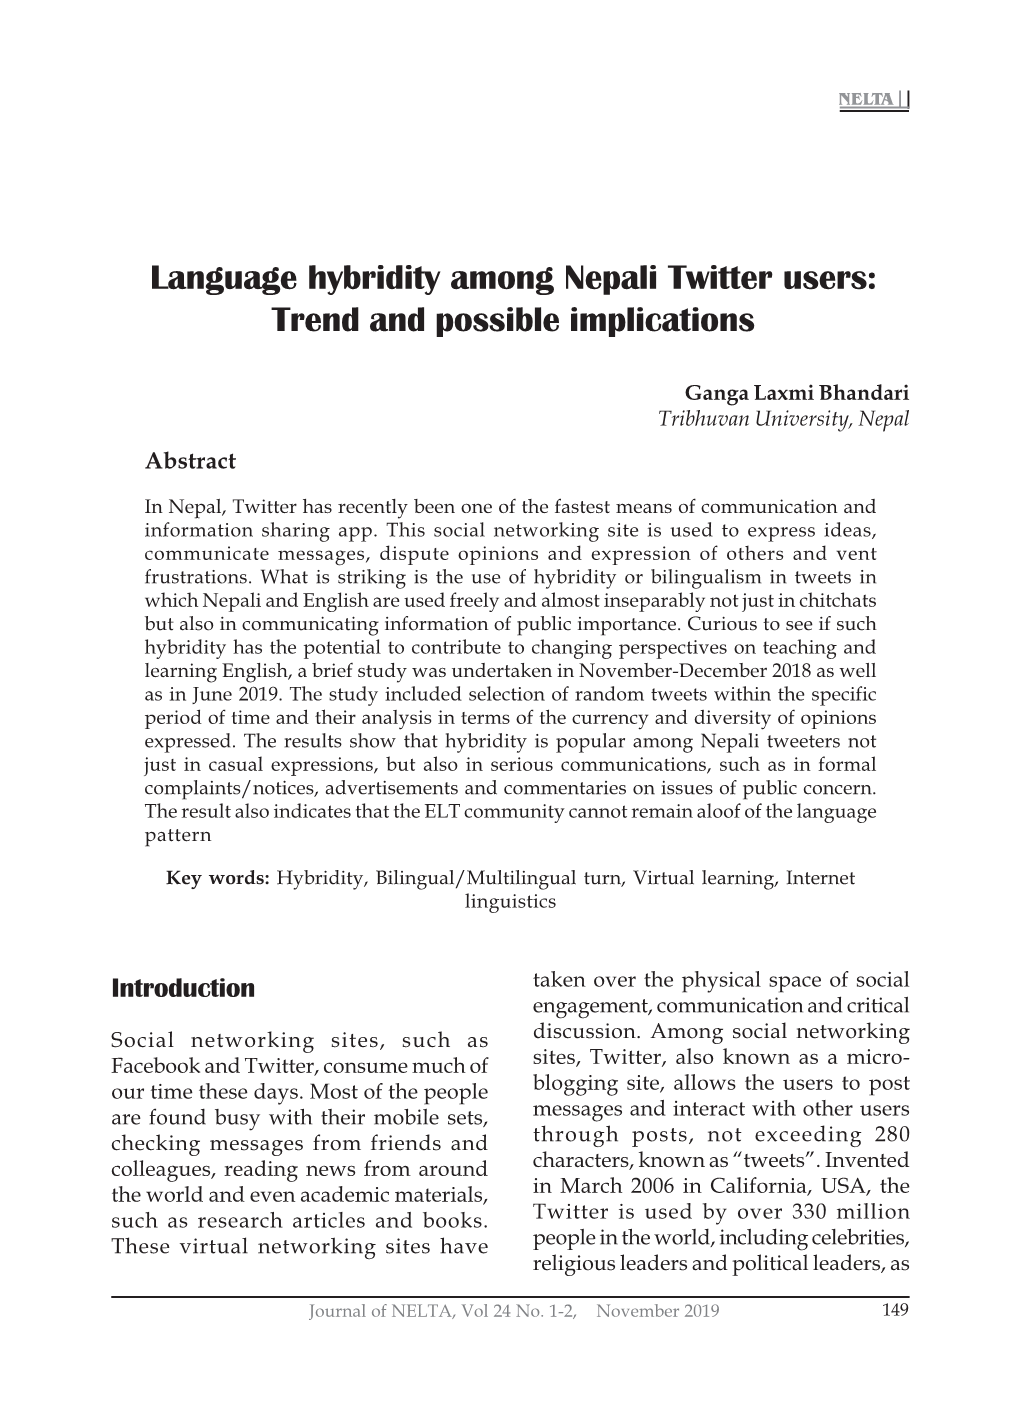 Language Hybridity Among Nepali Twitter Users: Trend and Possible Implications